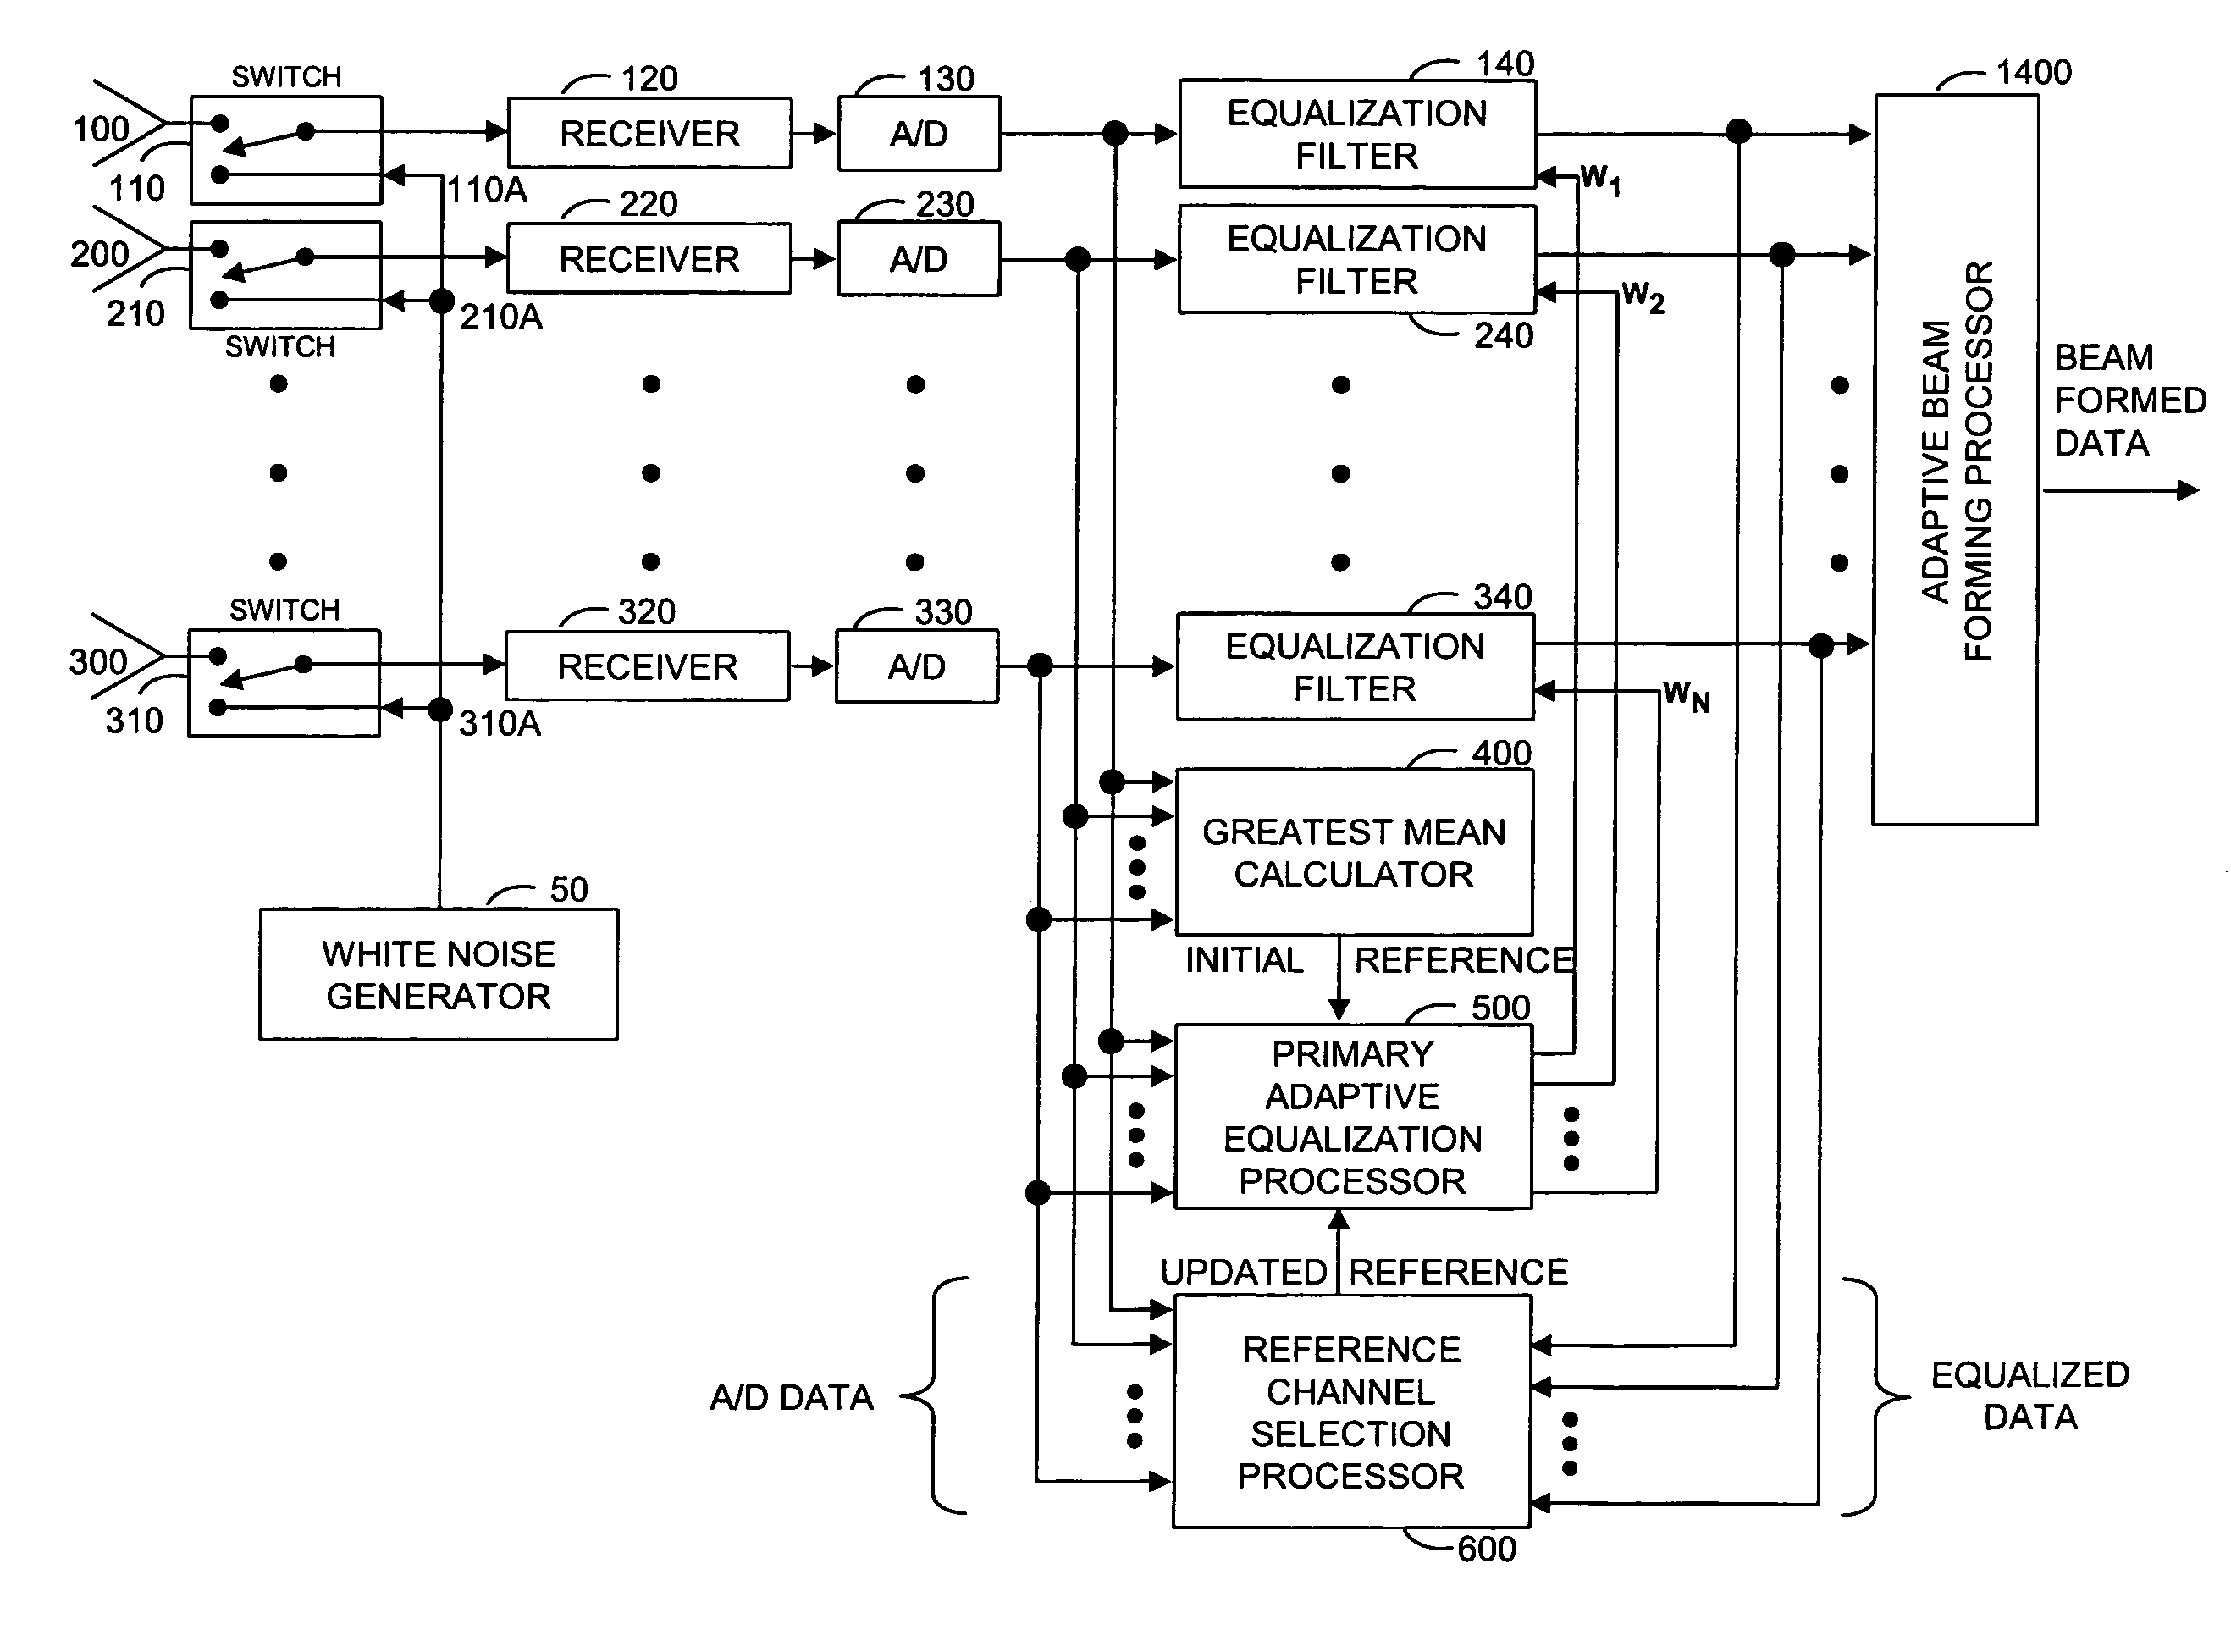 Apparatus and method for multi-channel equalization